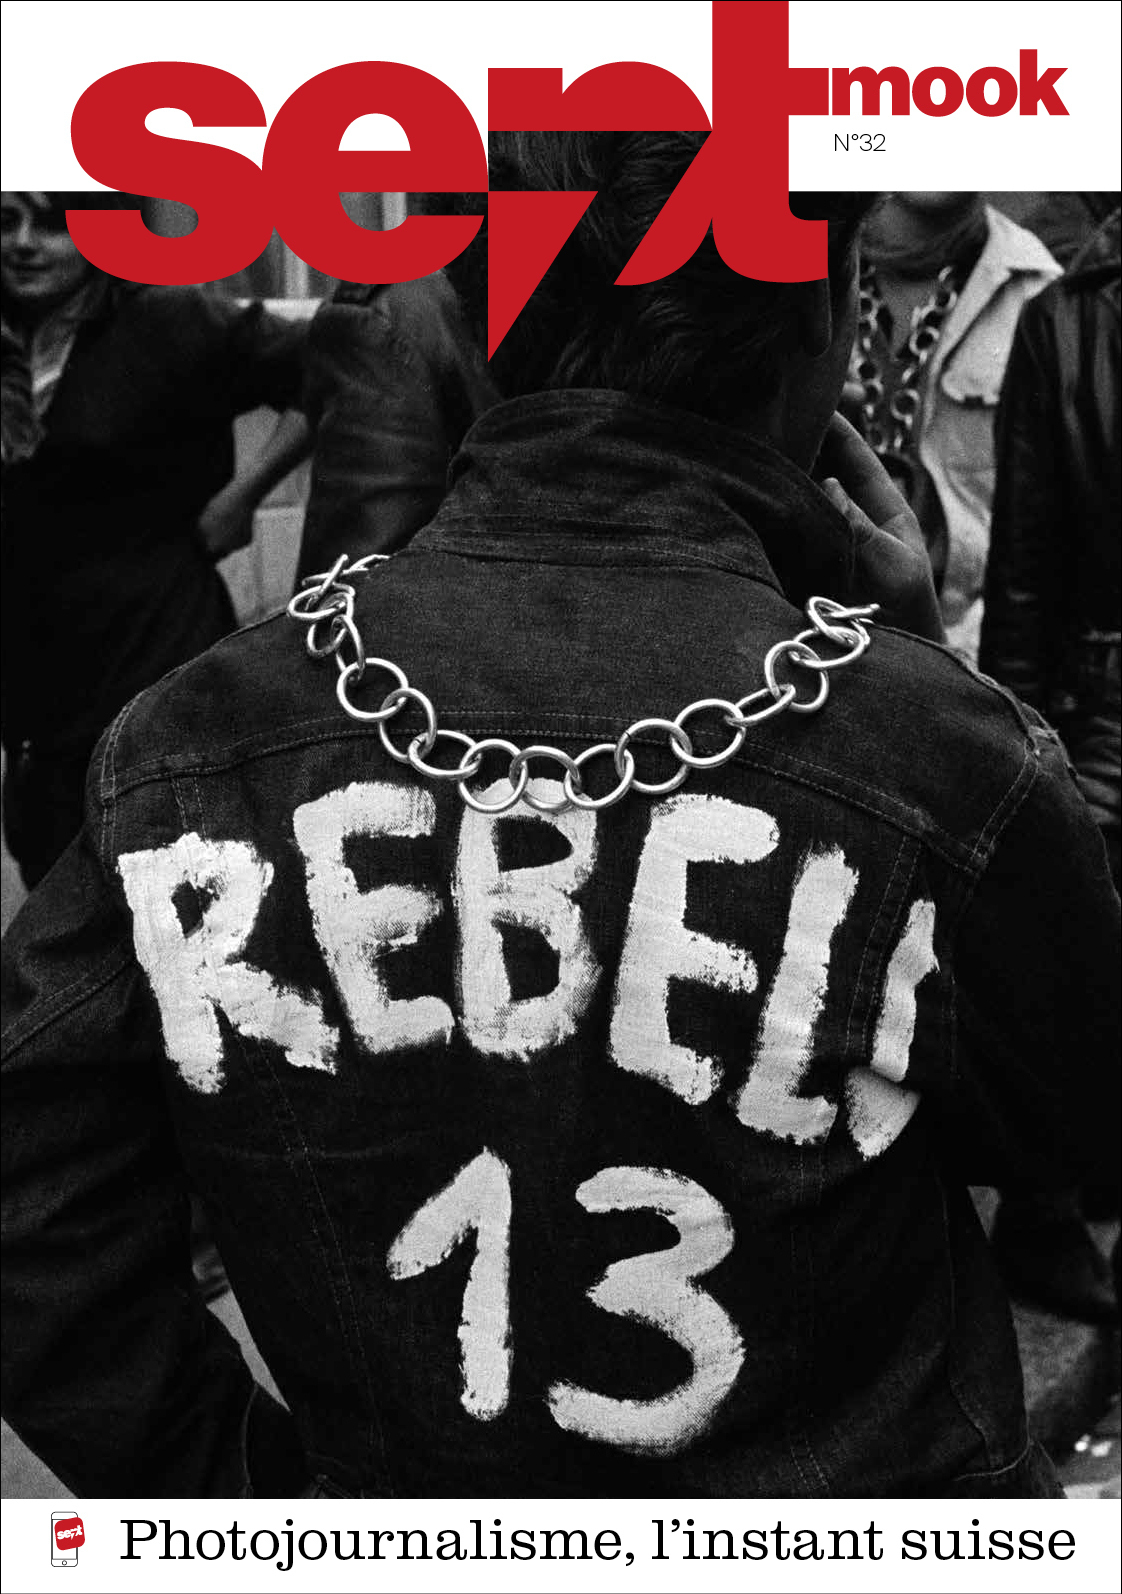 Cover 32